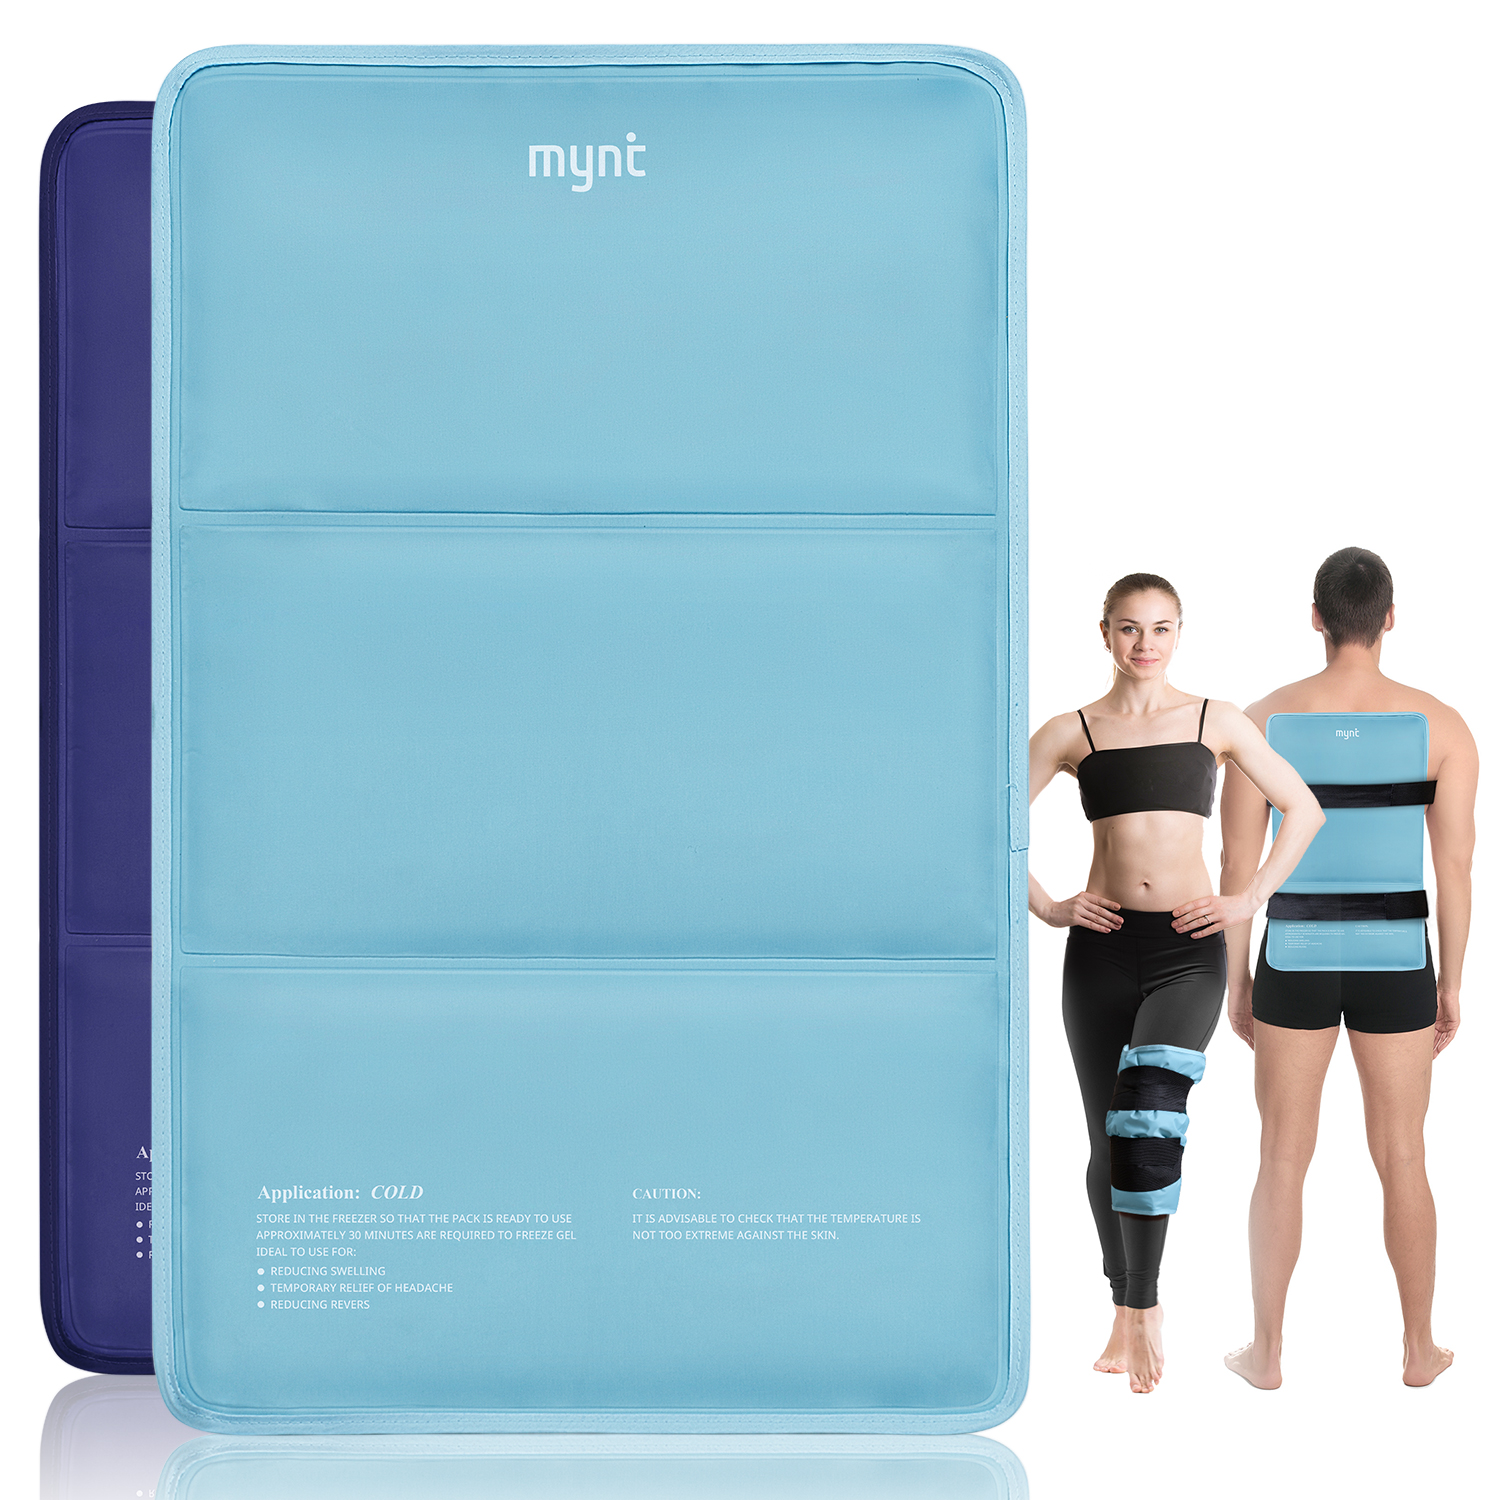 Mynt Reusable Gel Ice Pack with Large Size of 21”x13” and 2 Adjustable Straps for Neck Shoulder Back Waist Leg Knee Ankle Injuries(Sky Blue)